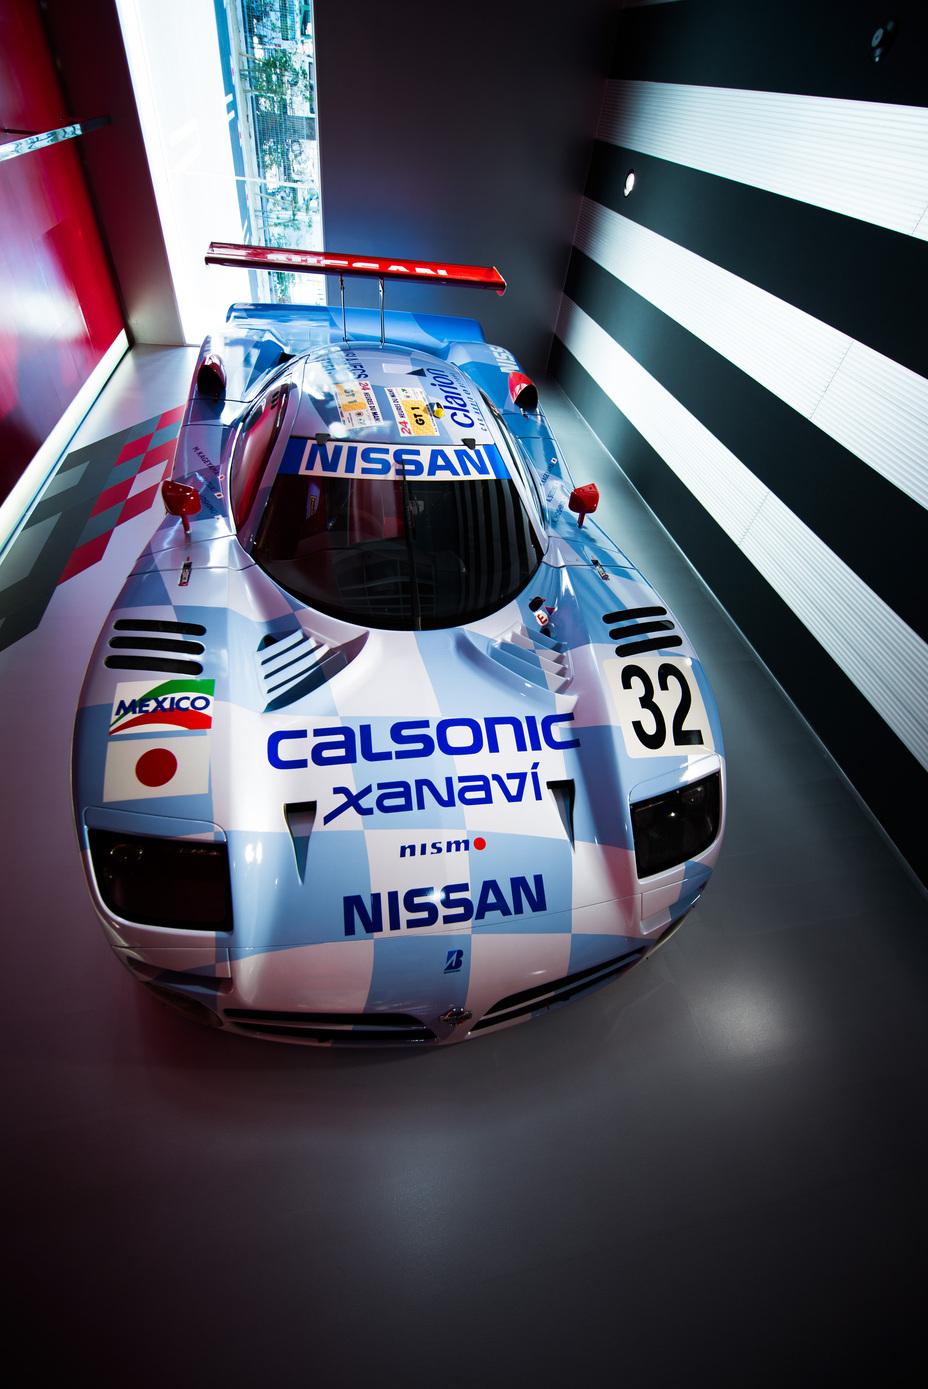 The Nissan R390 Gt1 Car That Ran To Third Overall In Le